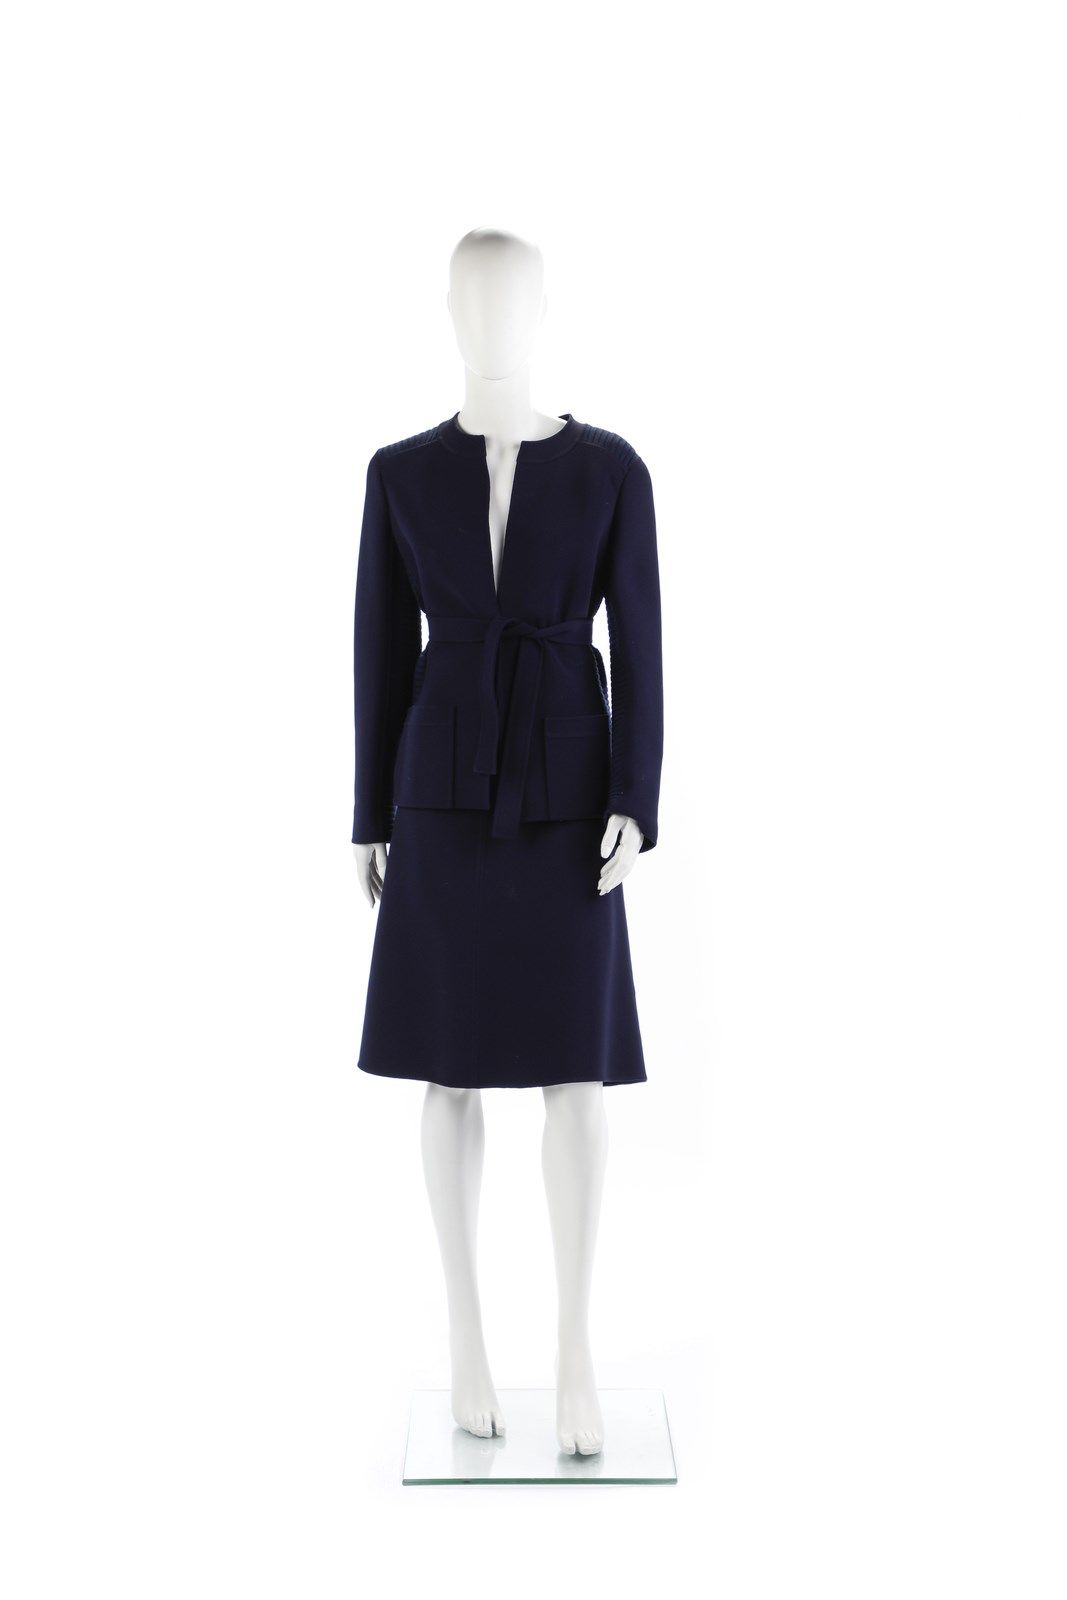 MILA SCHON Dark blue skirt and jacket with belt. Size46IT. Made in Italy. Jupe e&hellip;